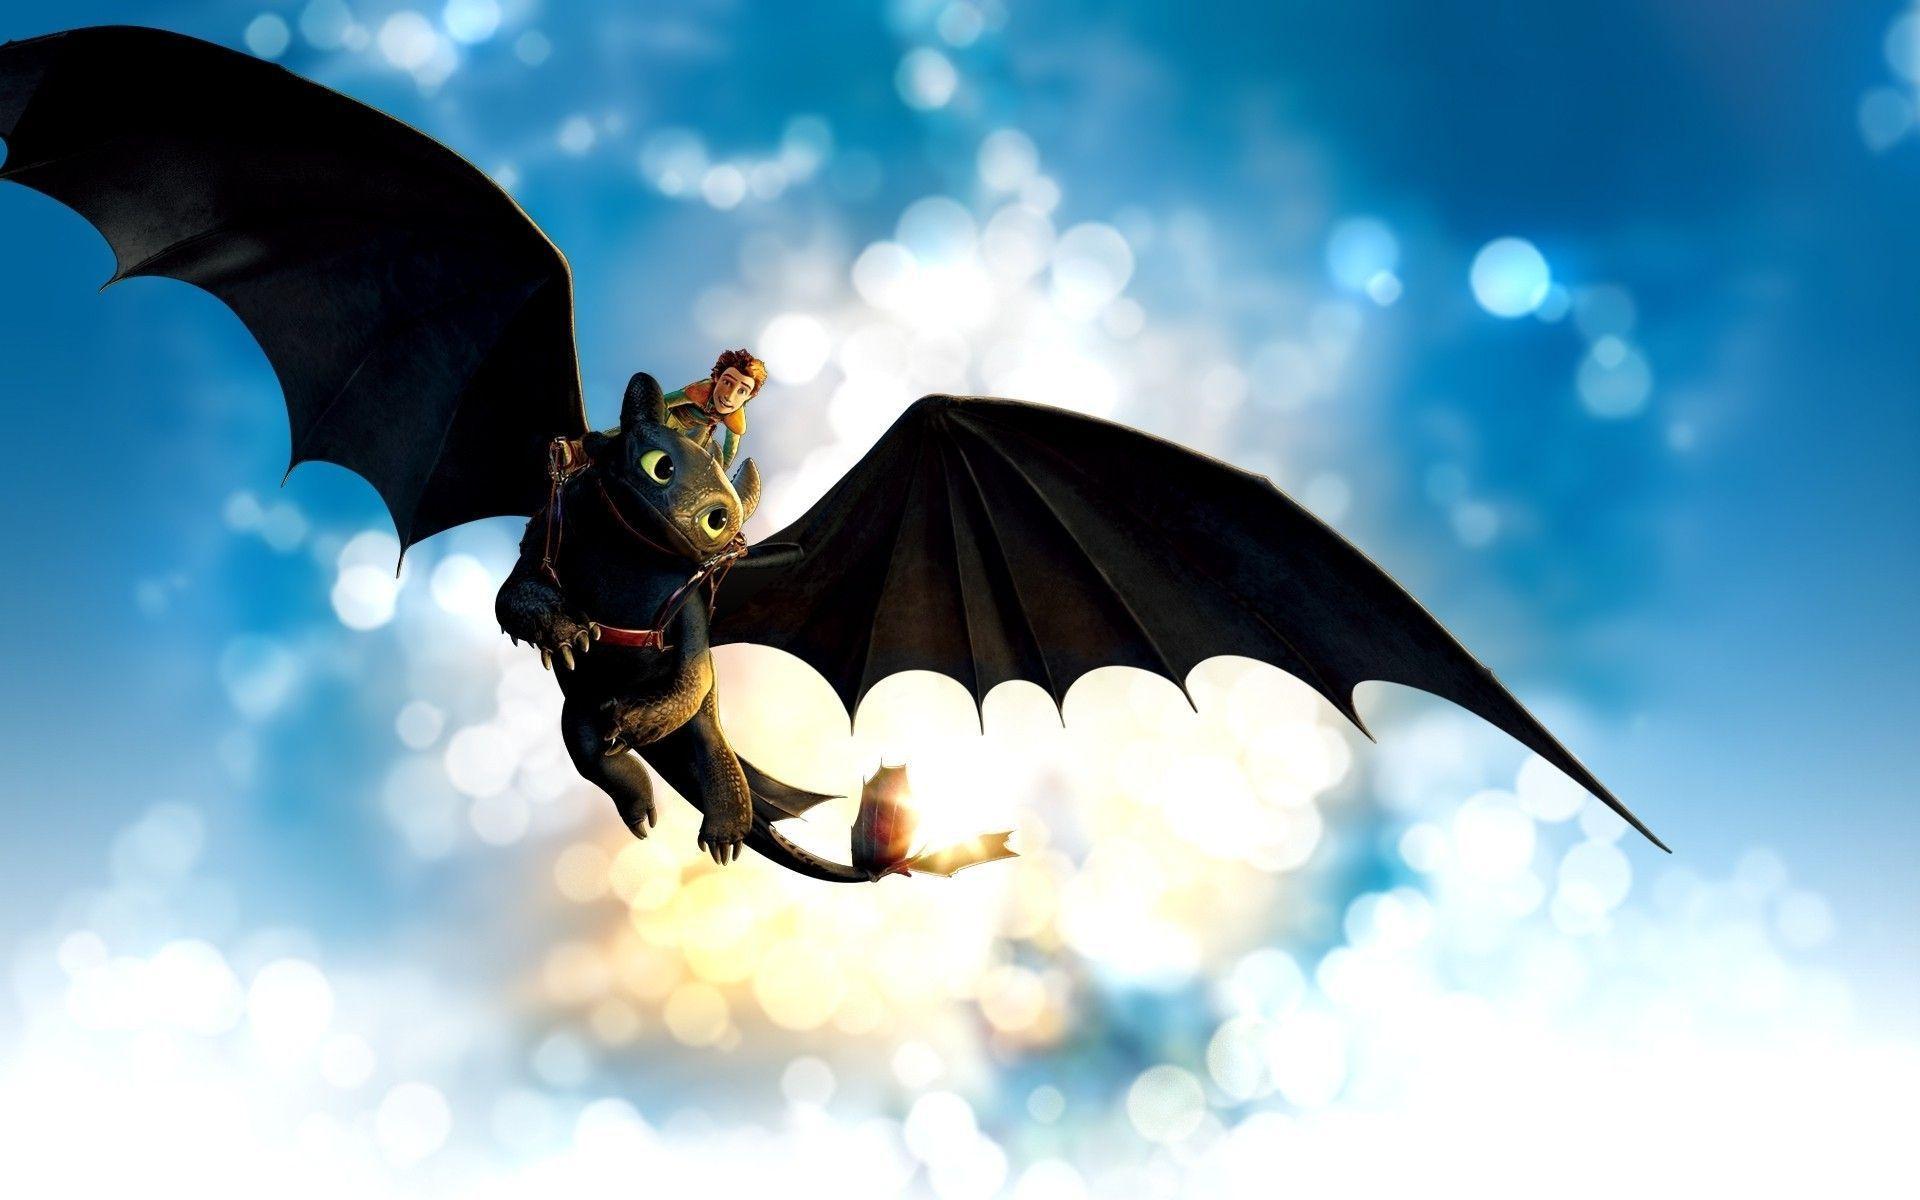 How To Train Your Dragon, Hiccup, Toothless Wallpaper HD 1920×1078 Toothless Wallpaper (40 Wallpaper). A. Toothless wallpaper, How train your dragon, Toothless